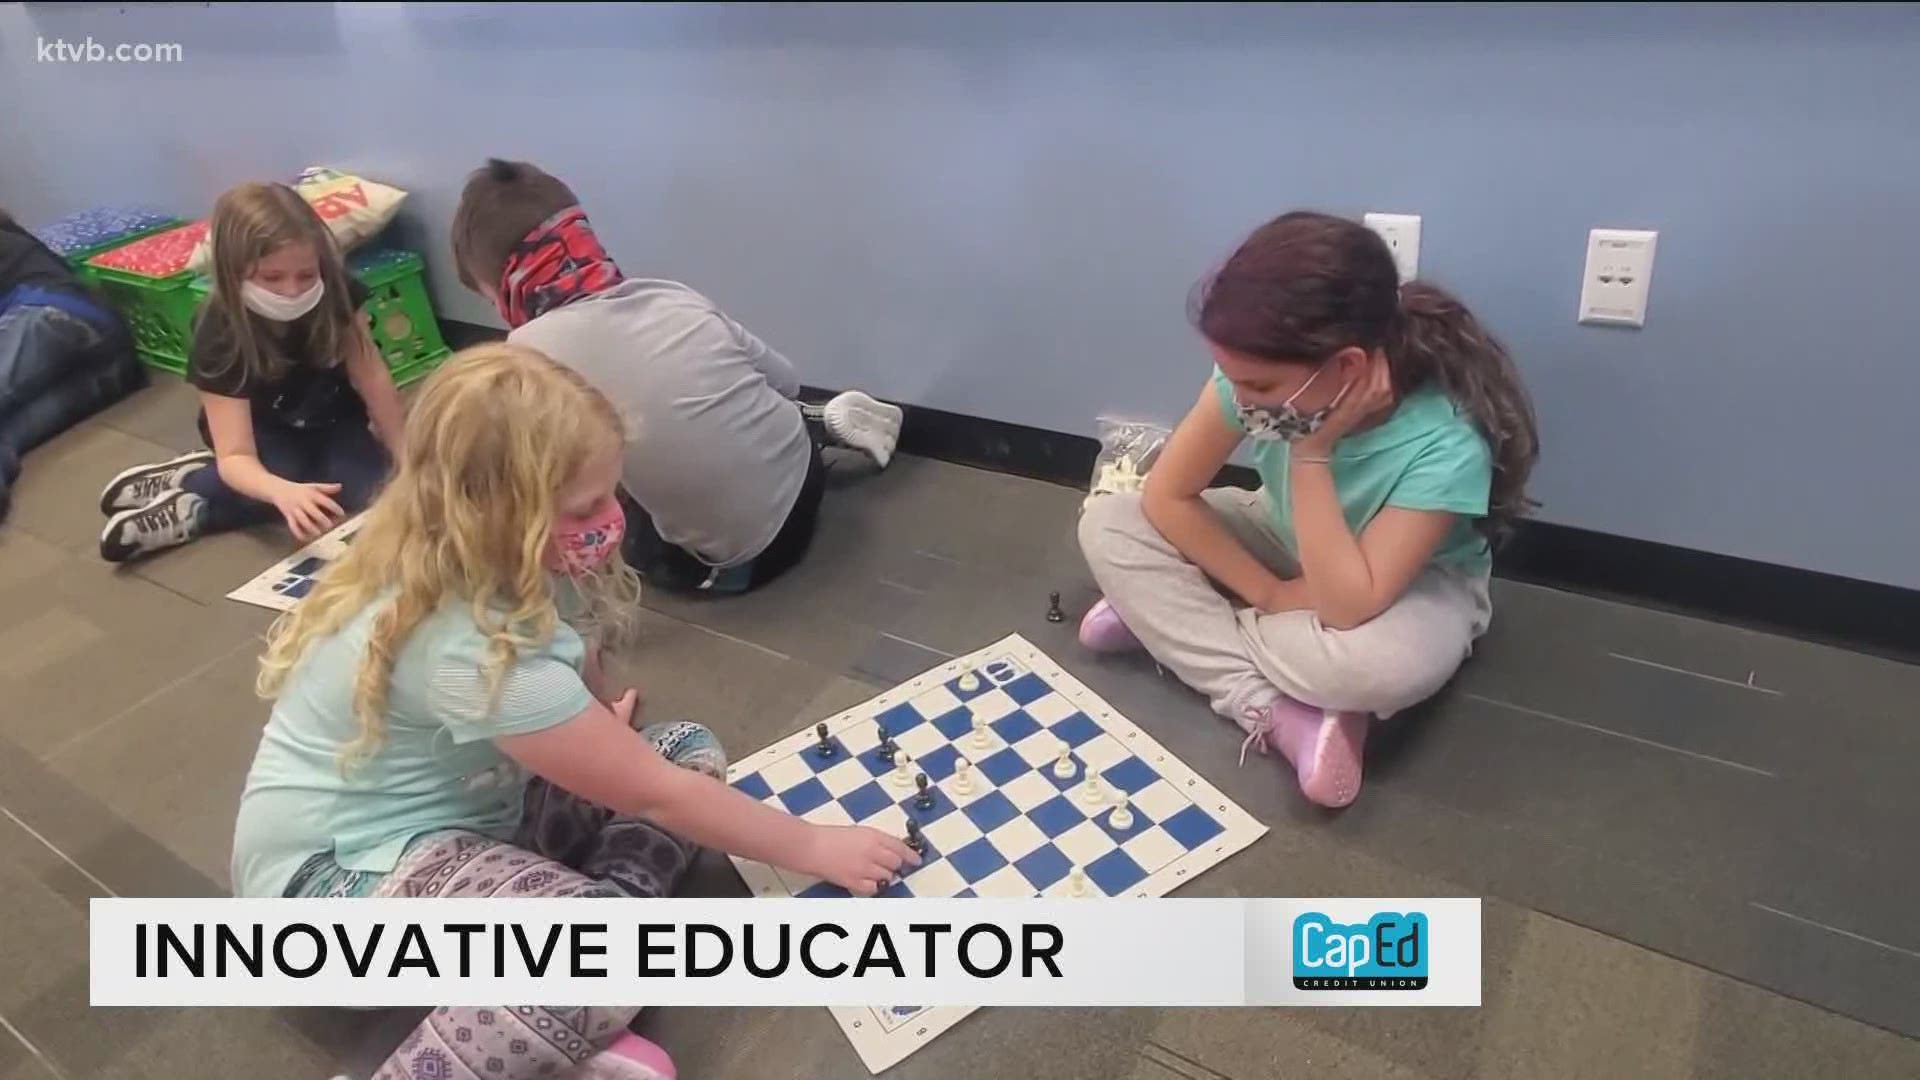 Felicity Steers says her third-graders are learning math, critical thinking, and sportsmanship alongside chess.